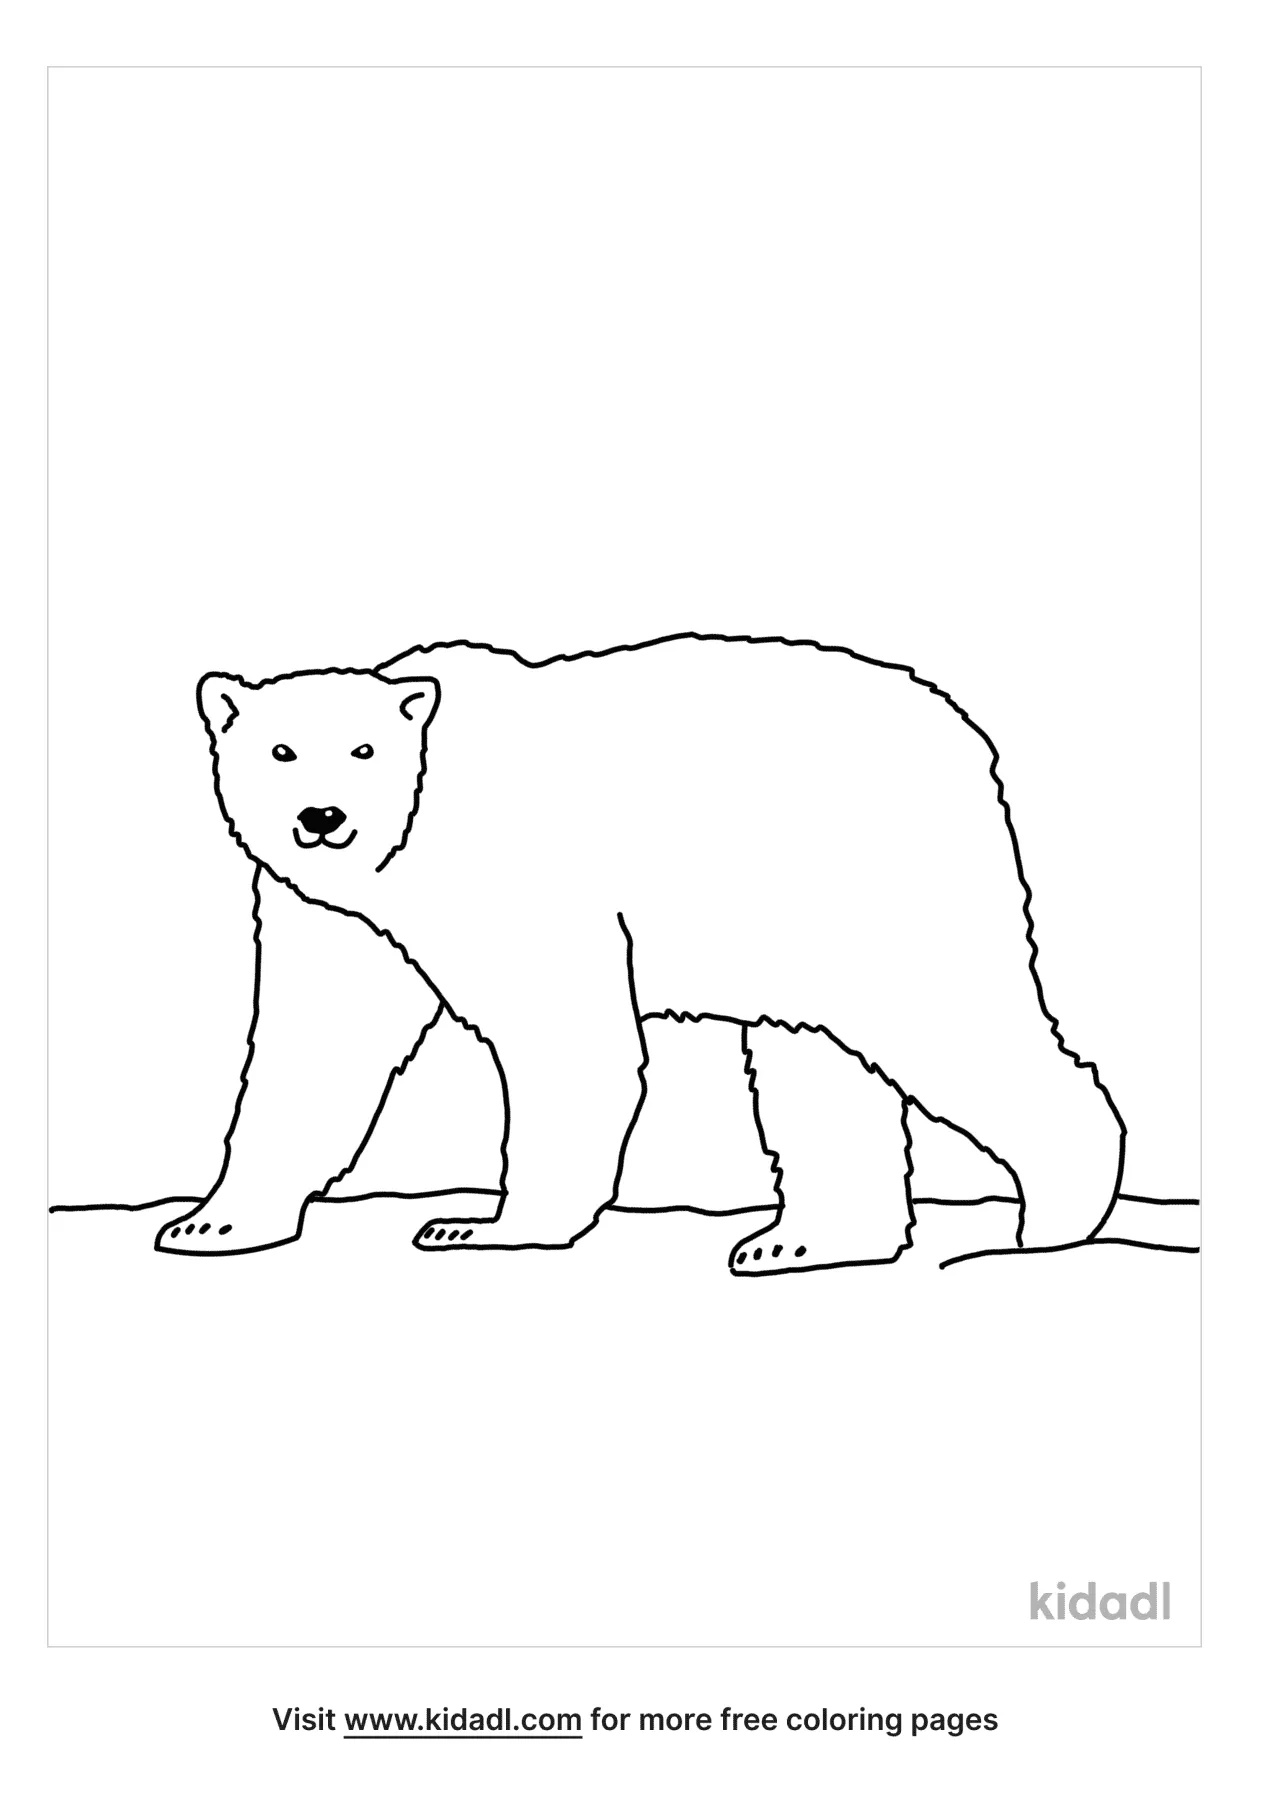 Arctic Animal Coloring Page   Free Arctic Coloring Page   Kidadl